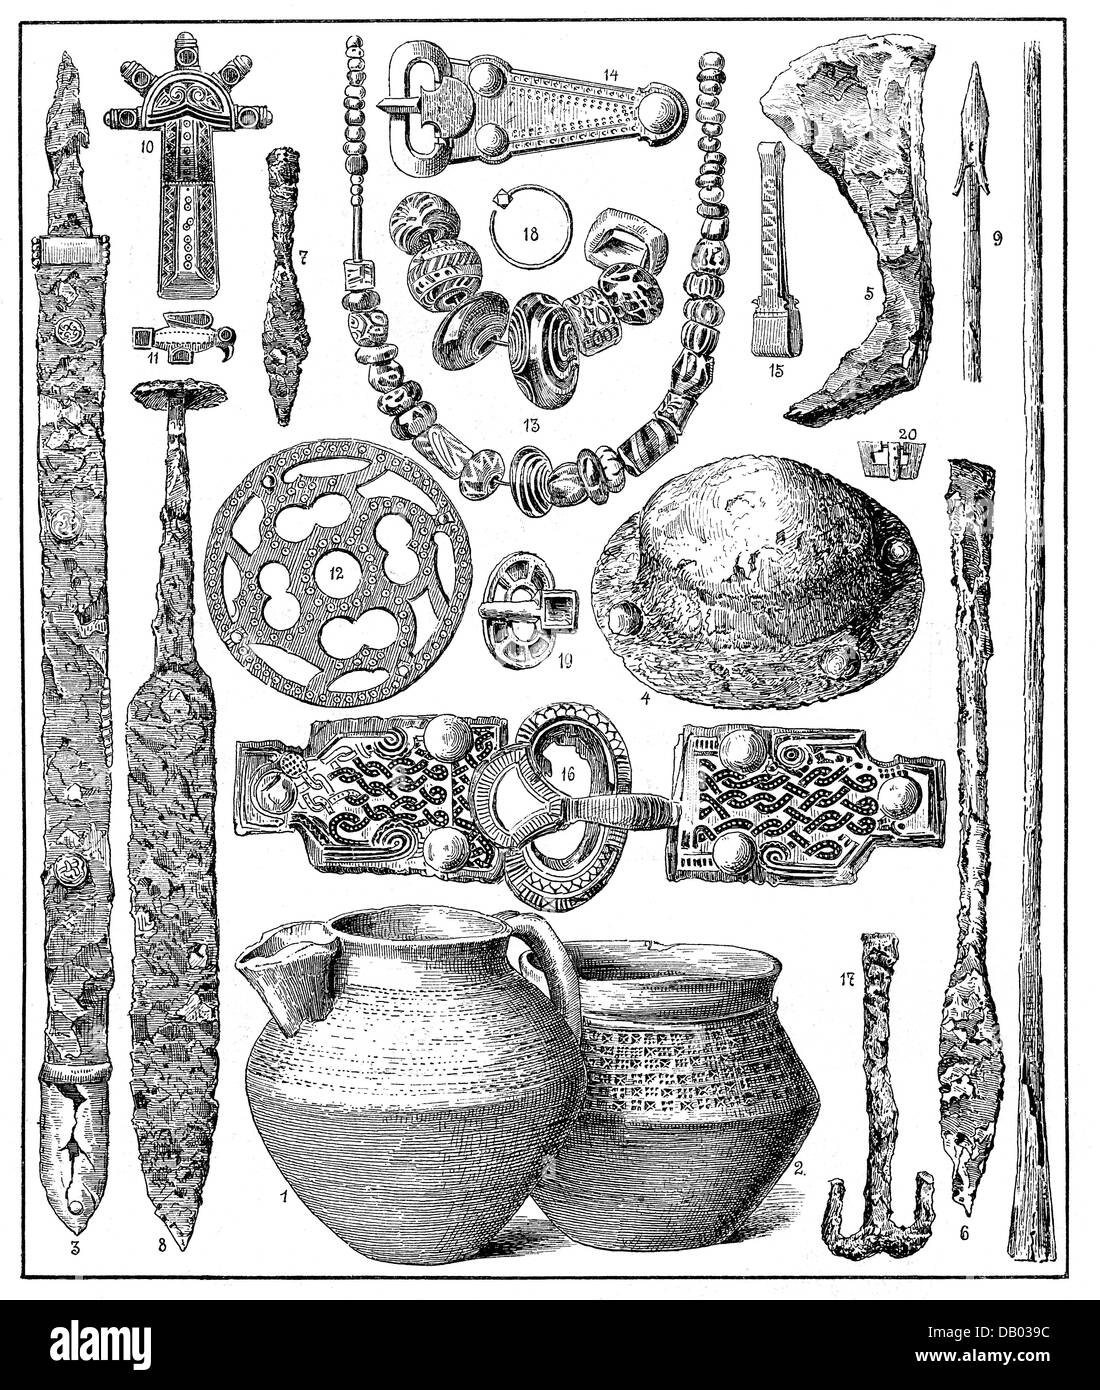 Middle Ages, late antiquity / Early Middle Ages, weapons, jewellery and tools of the Franks and Alemanni, wood engraving, 19th century, sword, swords, pot, pots, necklace, necklaces, spearhead, spearheads, jewellery, objects, pendants, pendant, ancient, medieval, mediaeval, historic, historical, people, Additional-Rights-Clearences-Not Available Stock Photo